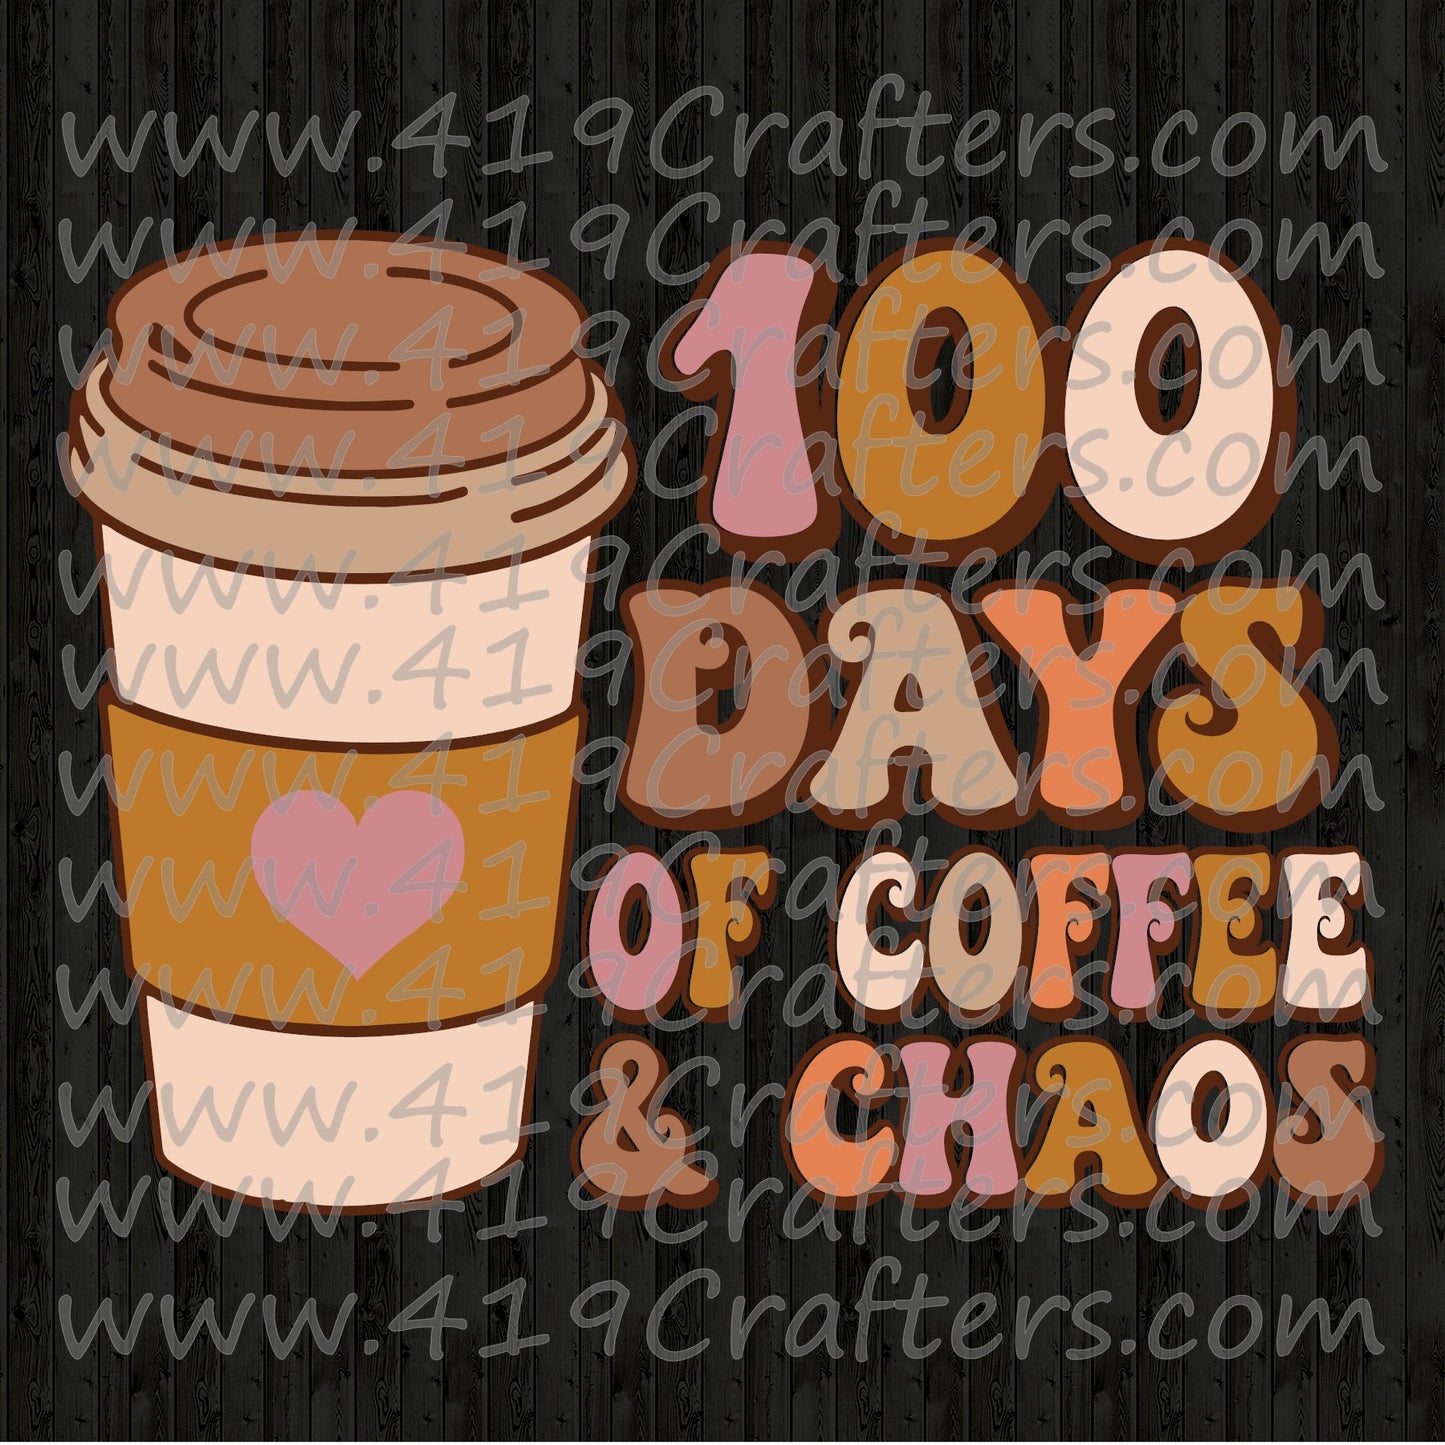 100 DAYS OF COFFEE AND CHAOS